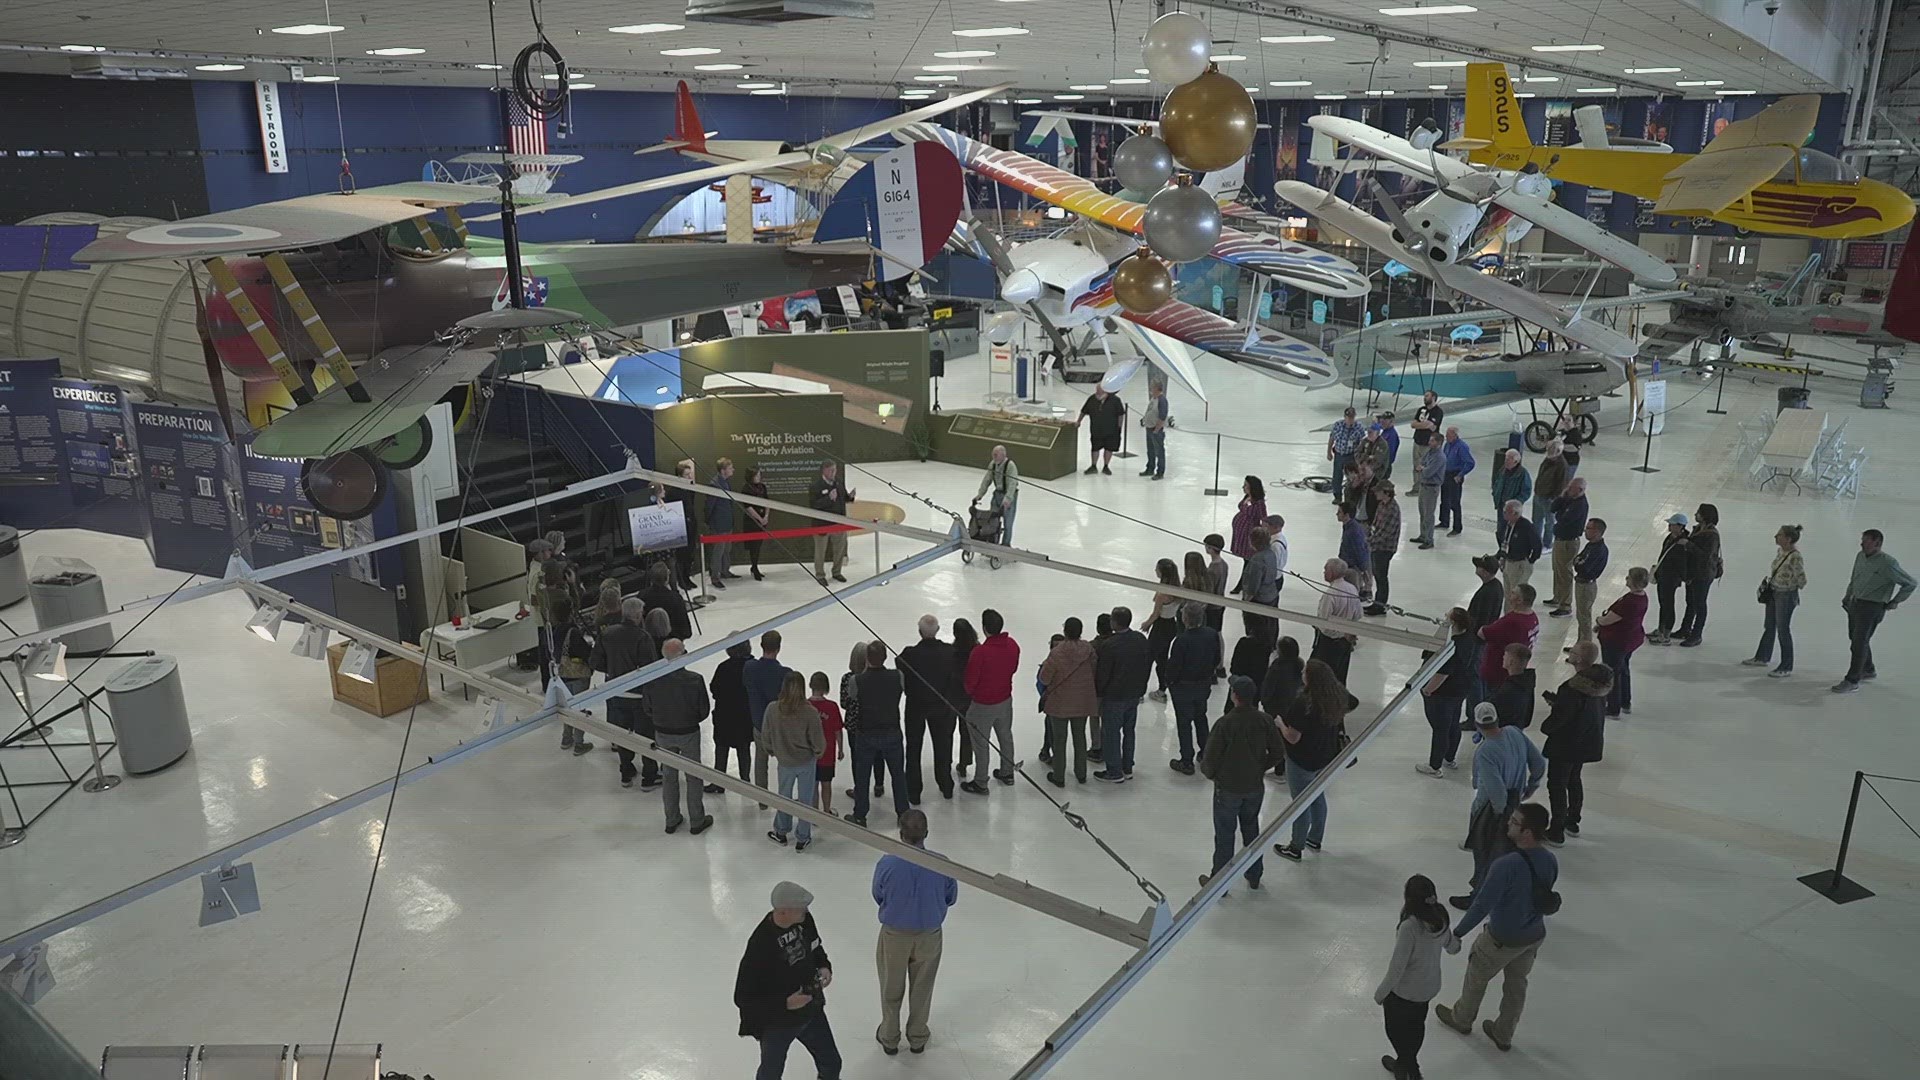 The exhibit has interactive experiences for visitors, like a Wright Flyer simulator, and an original Wright Model K propeller.